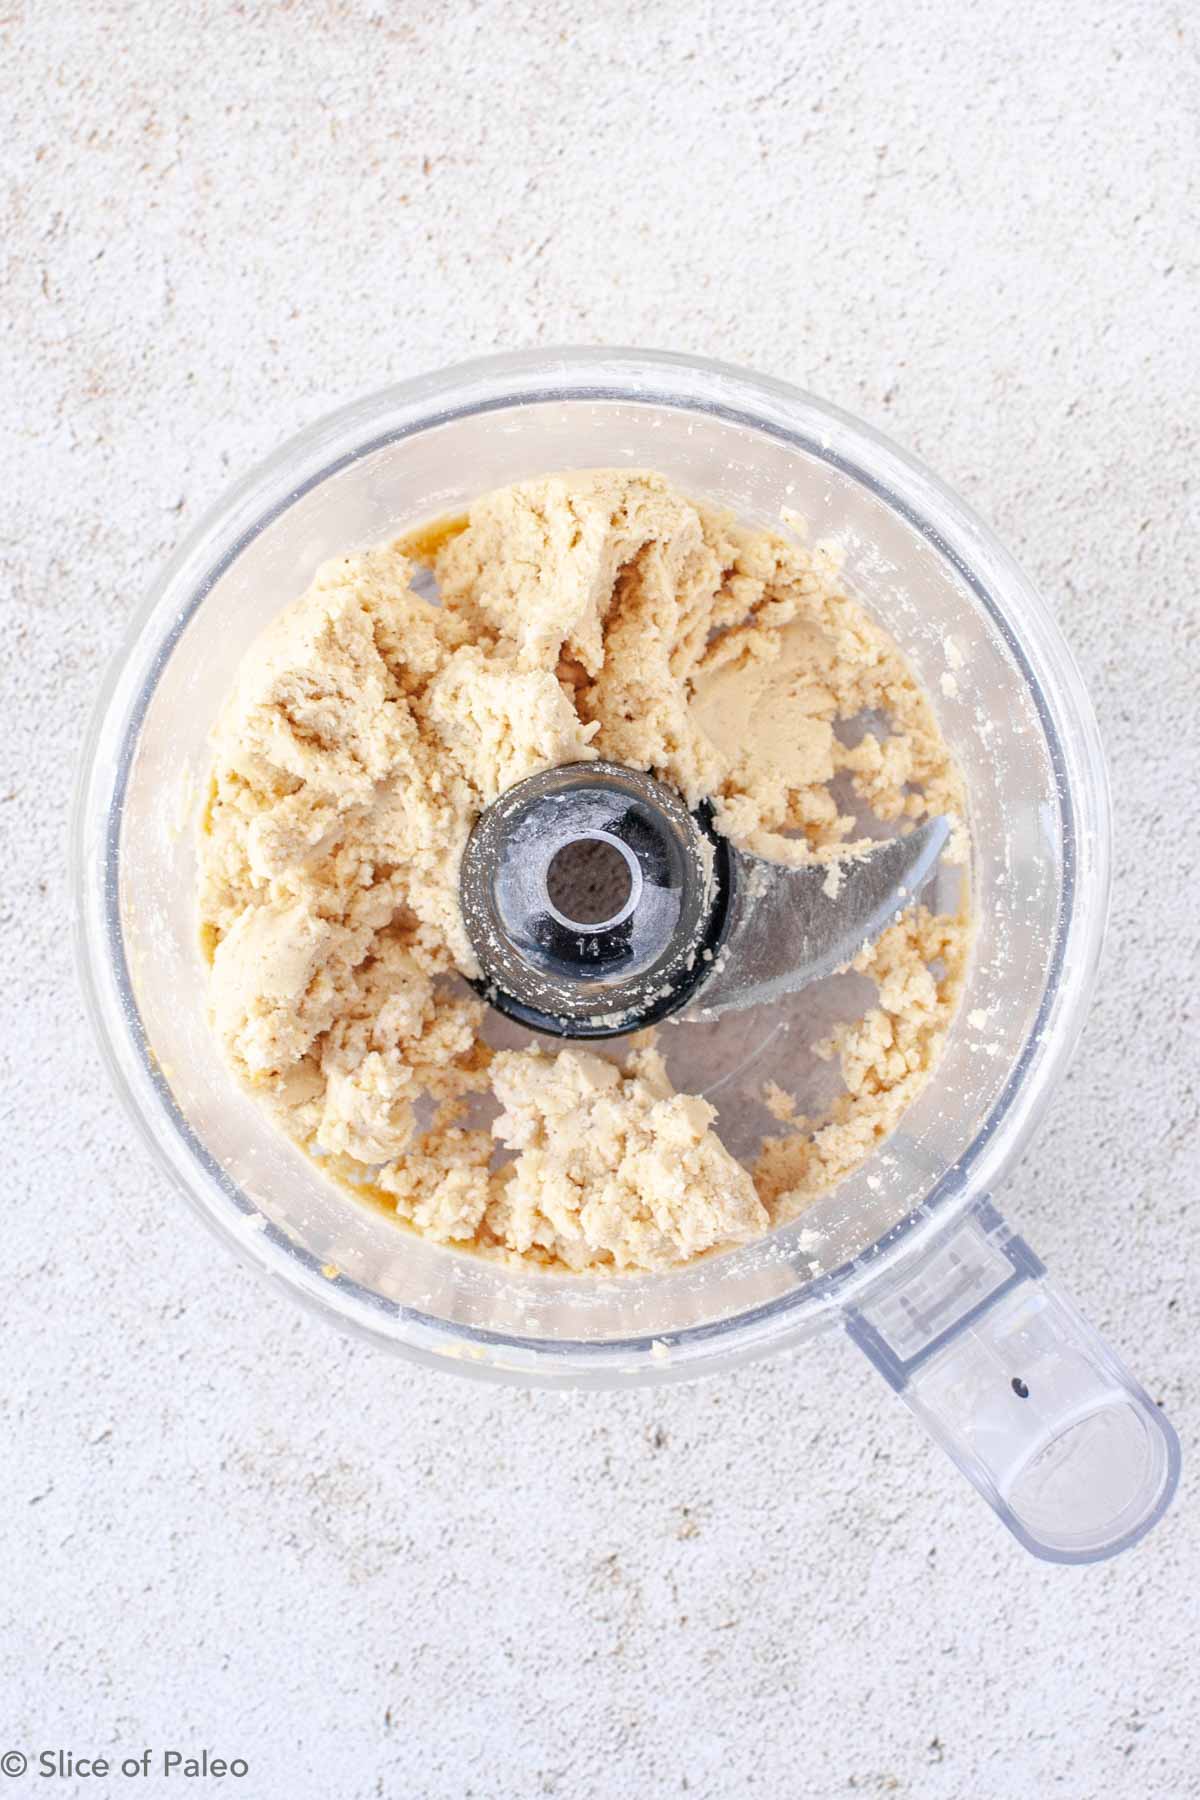 Paleo pie crust flour, shortening and egg in a food processor